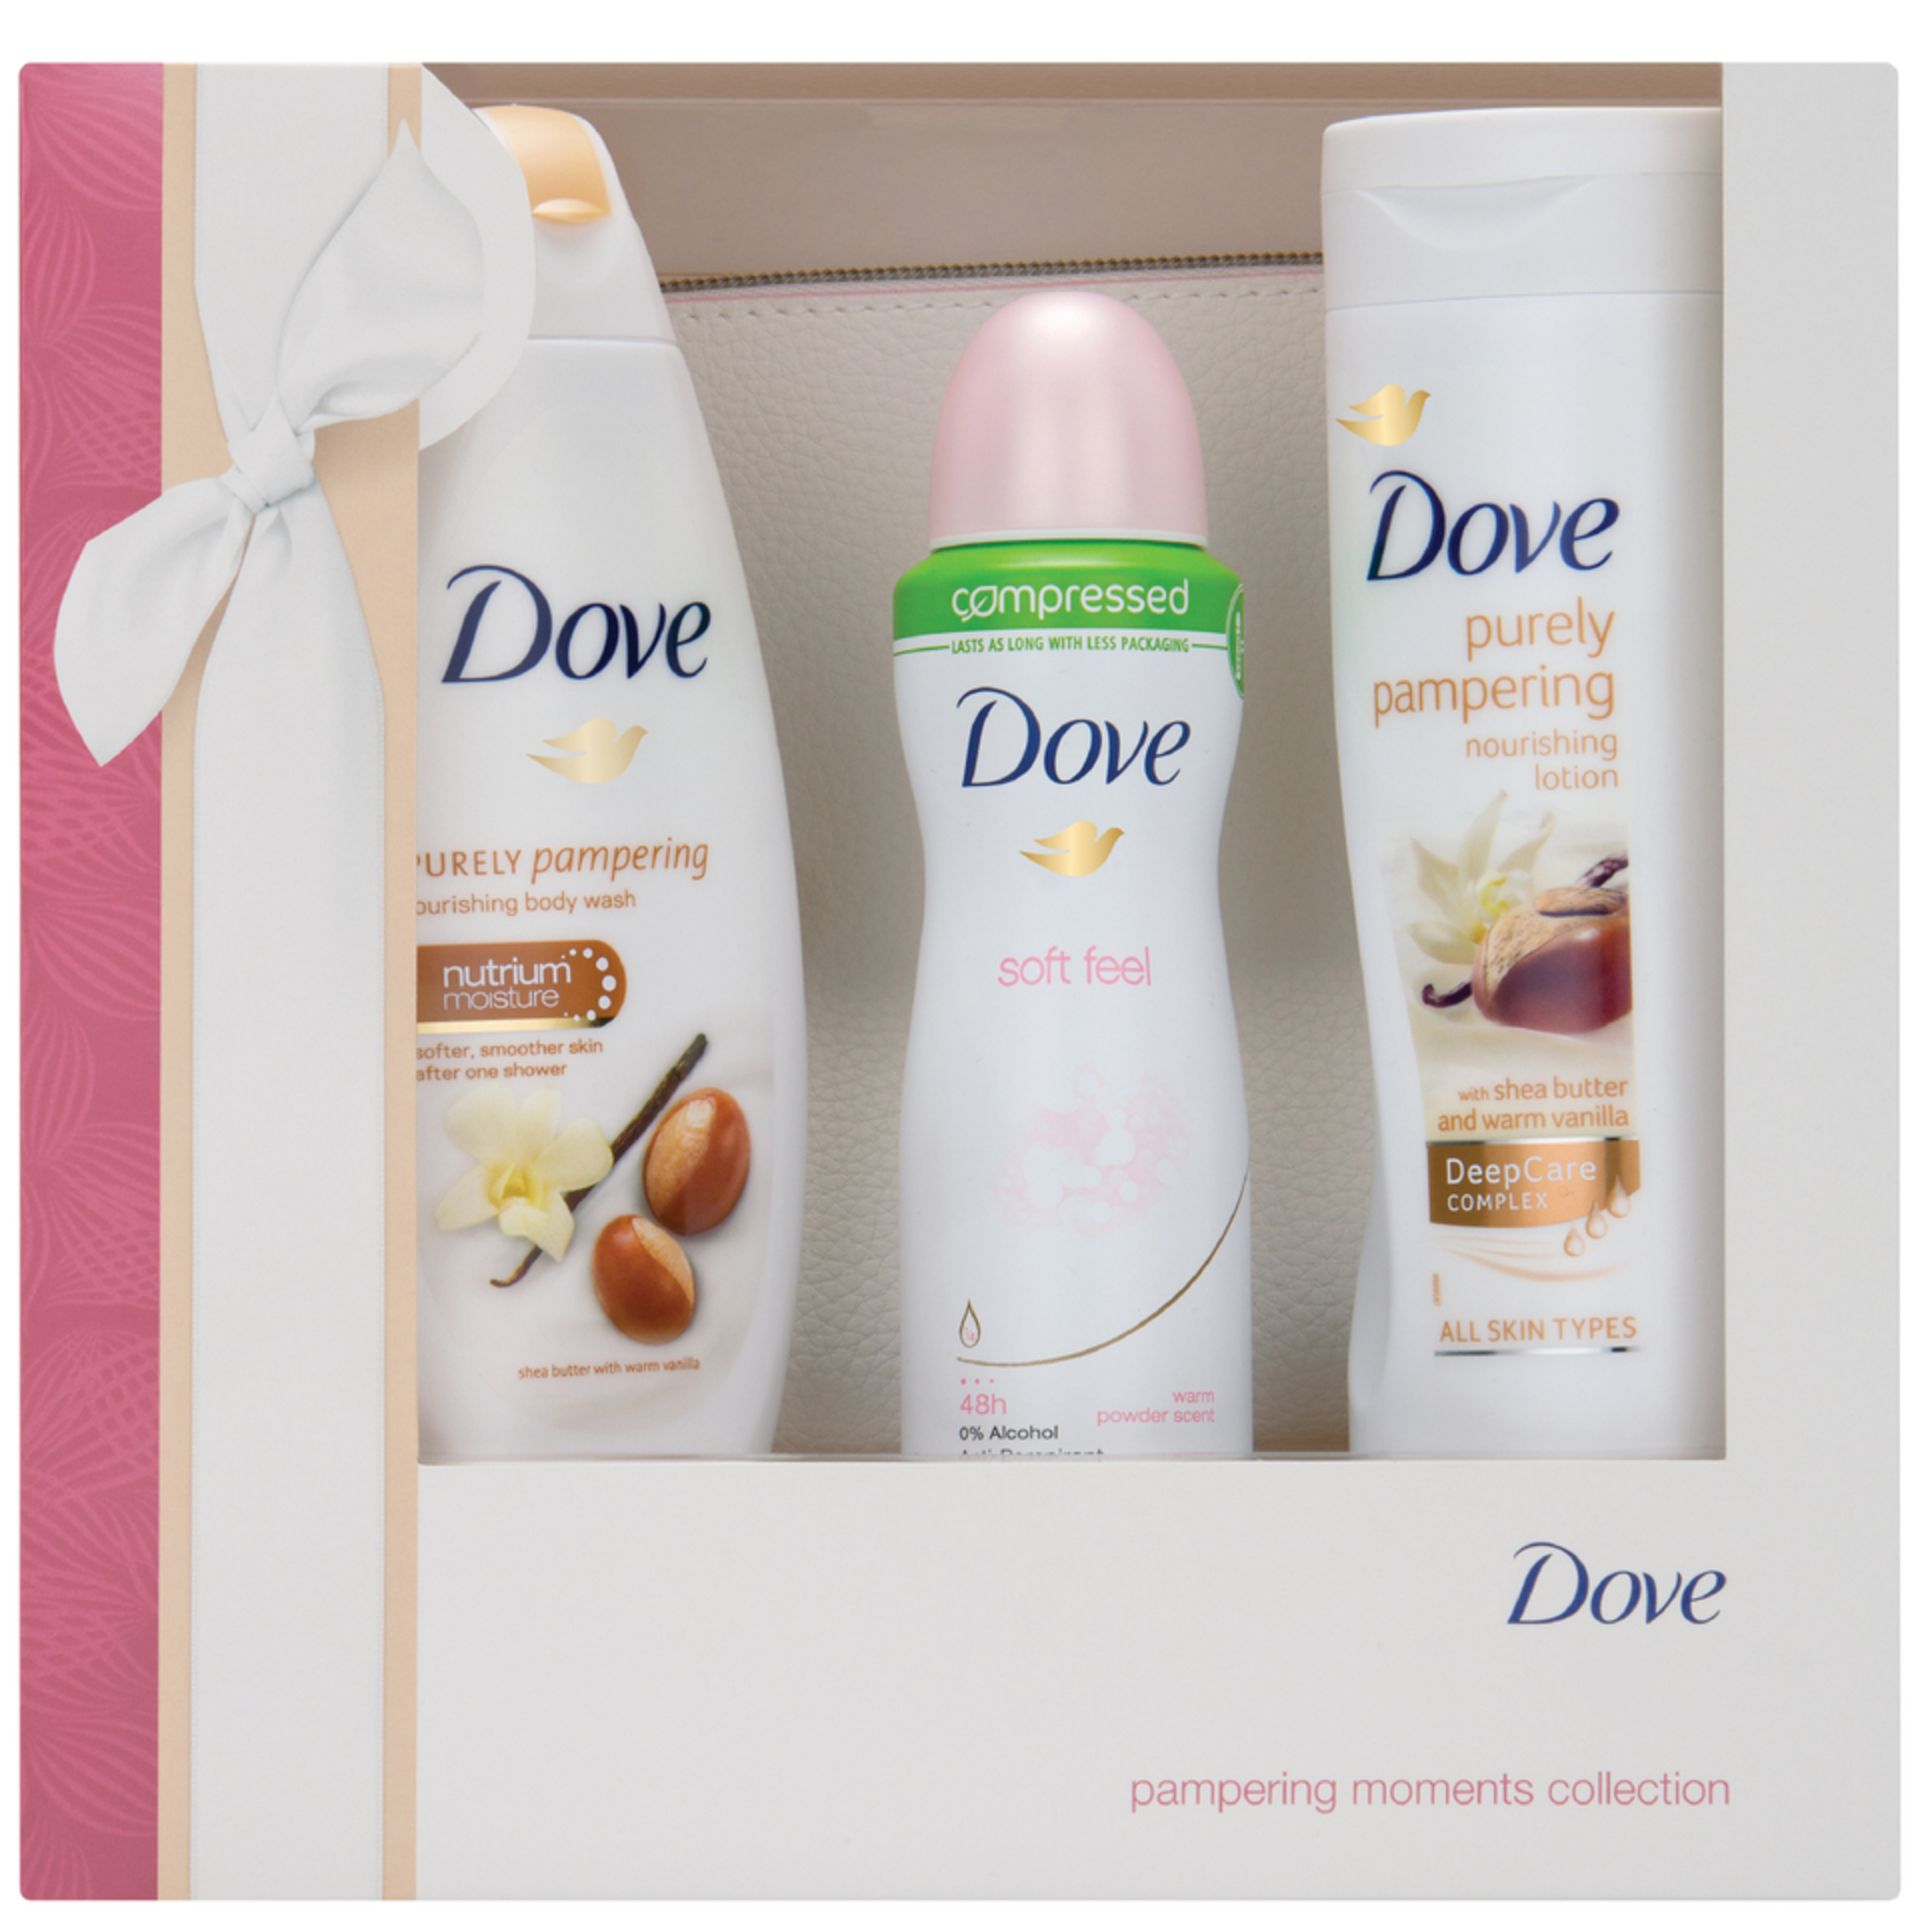 V Brand New Dove Pampering Moments Trio & Washbag Set Includes 3 Full-Size Dove Products X 2 YOUR